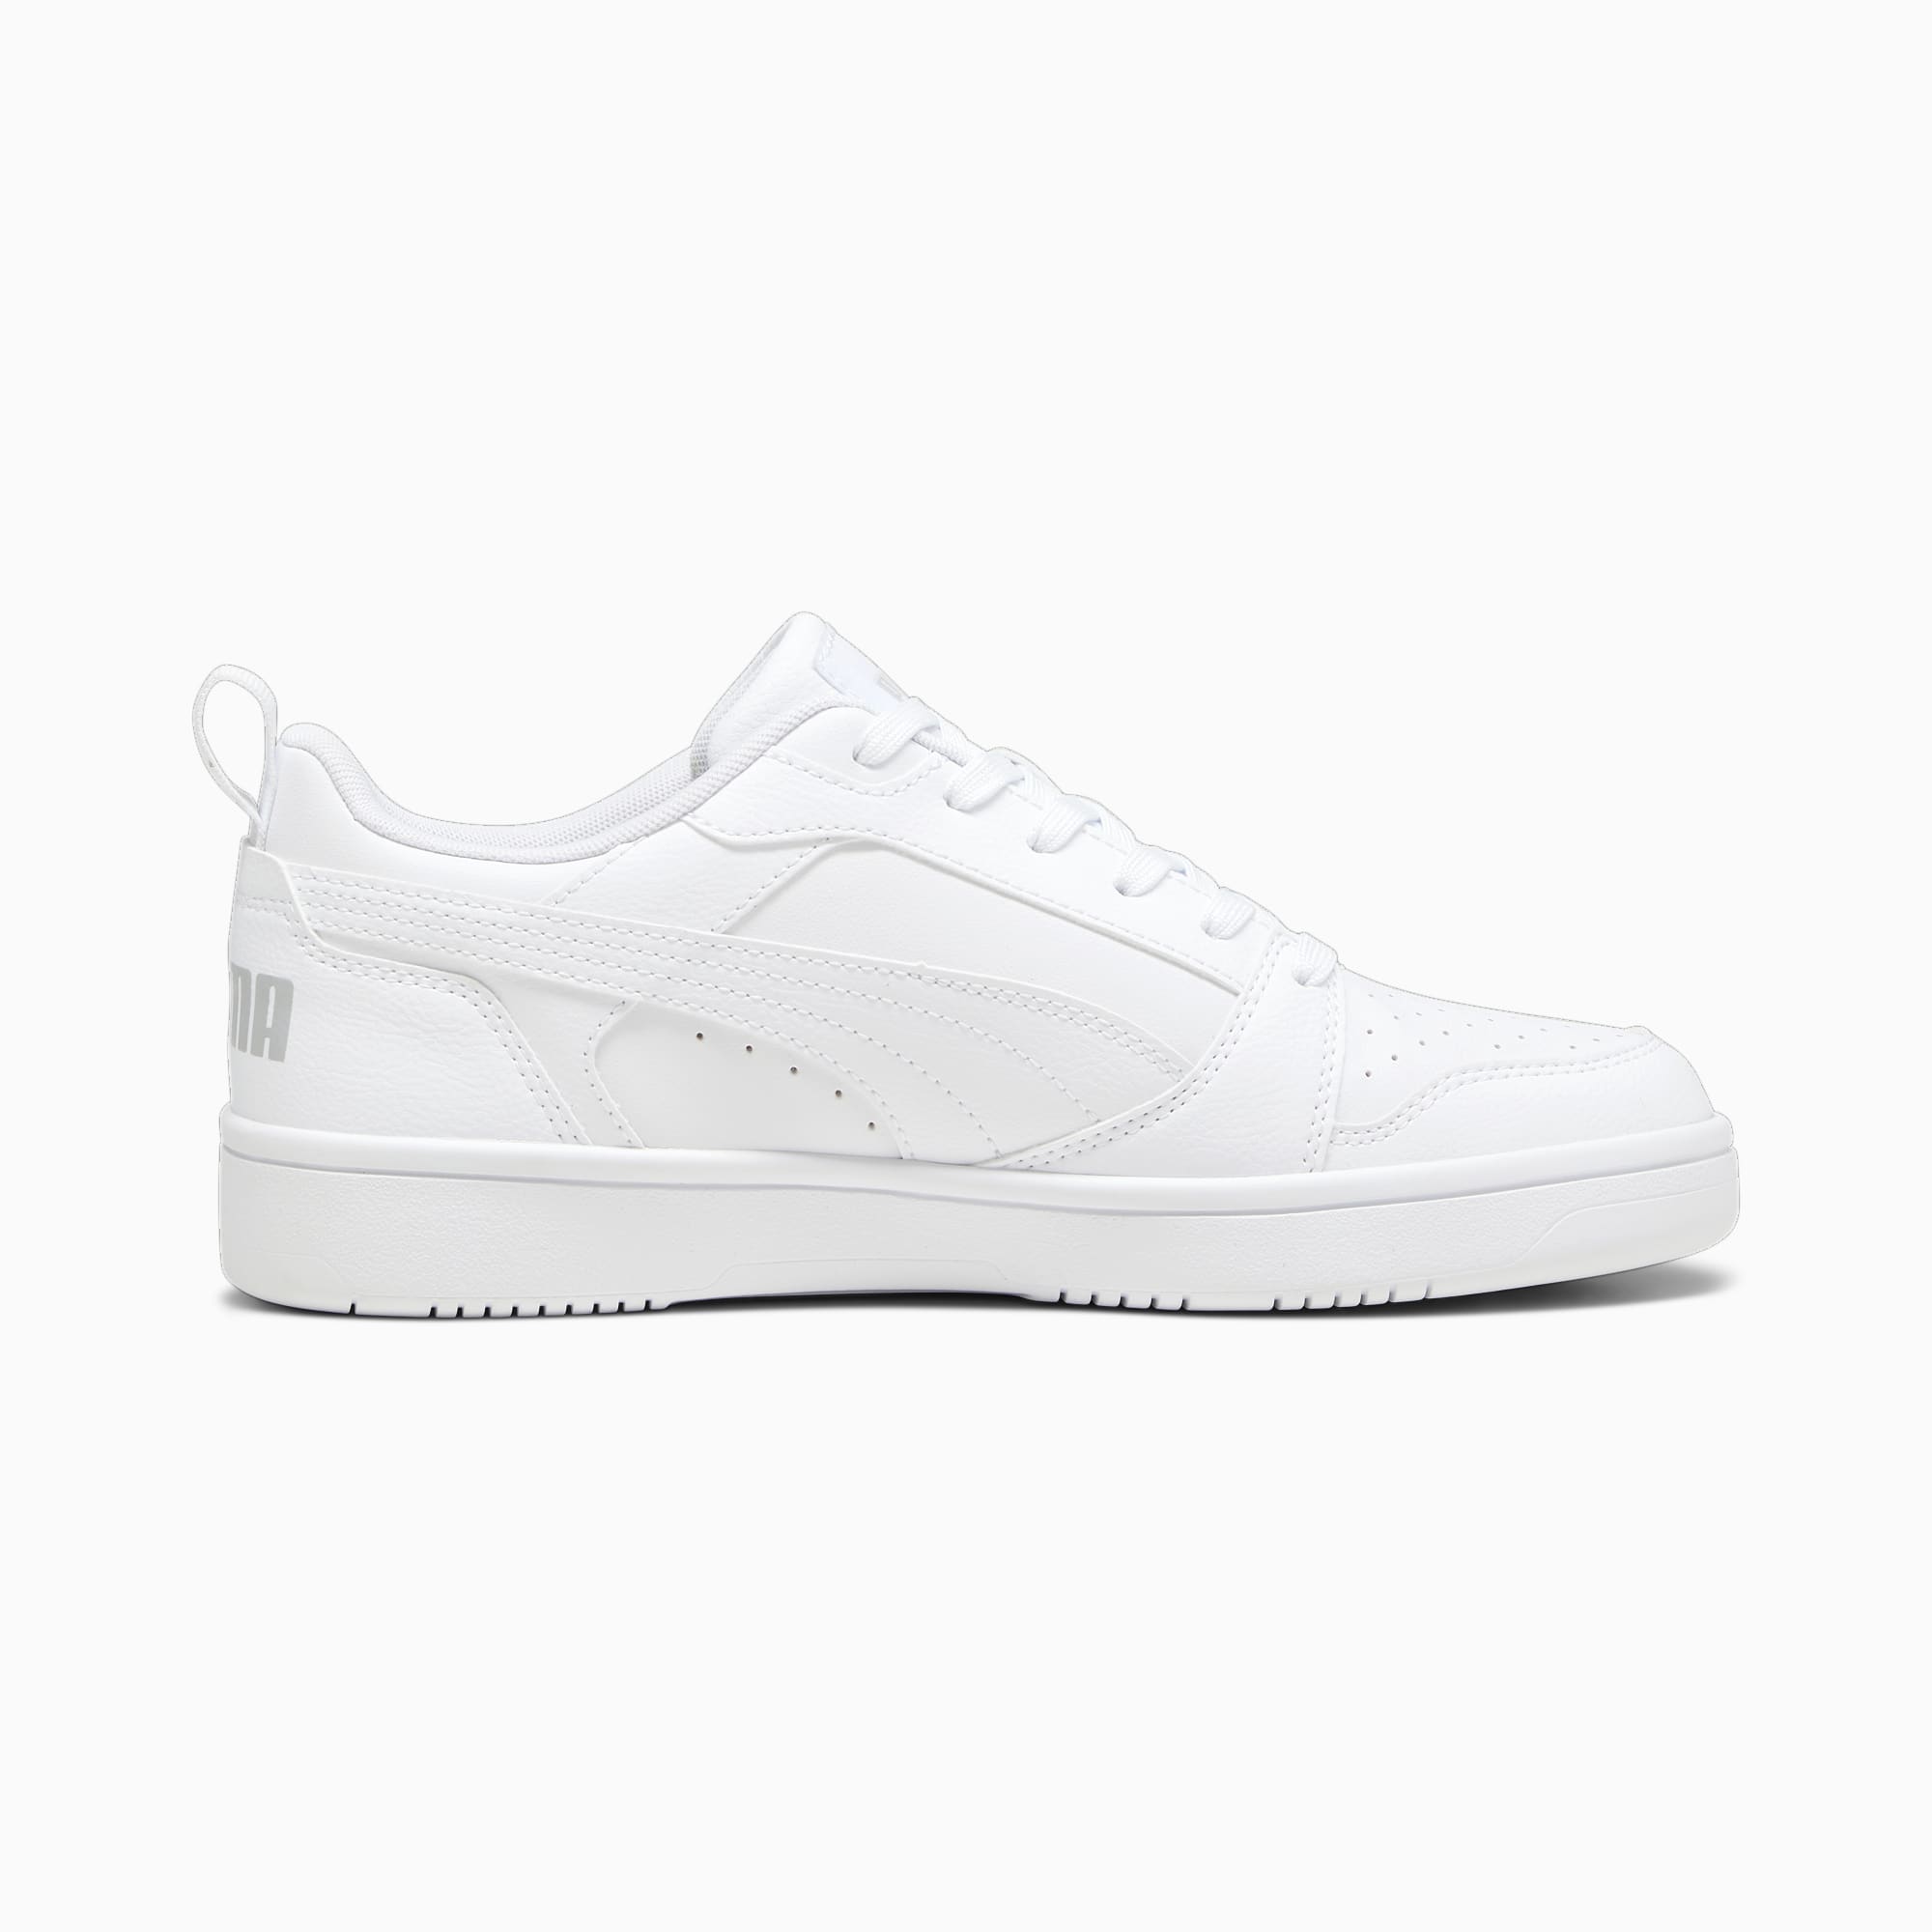 PUMA Chaussure Sneakers Rebound V6 Low, Blanc/Gris